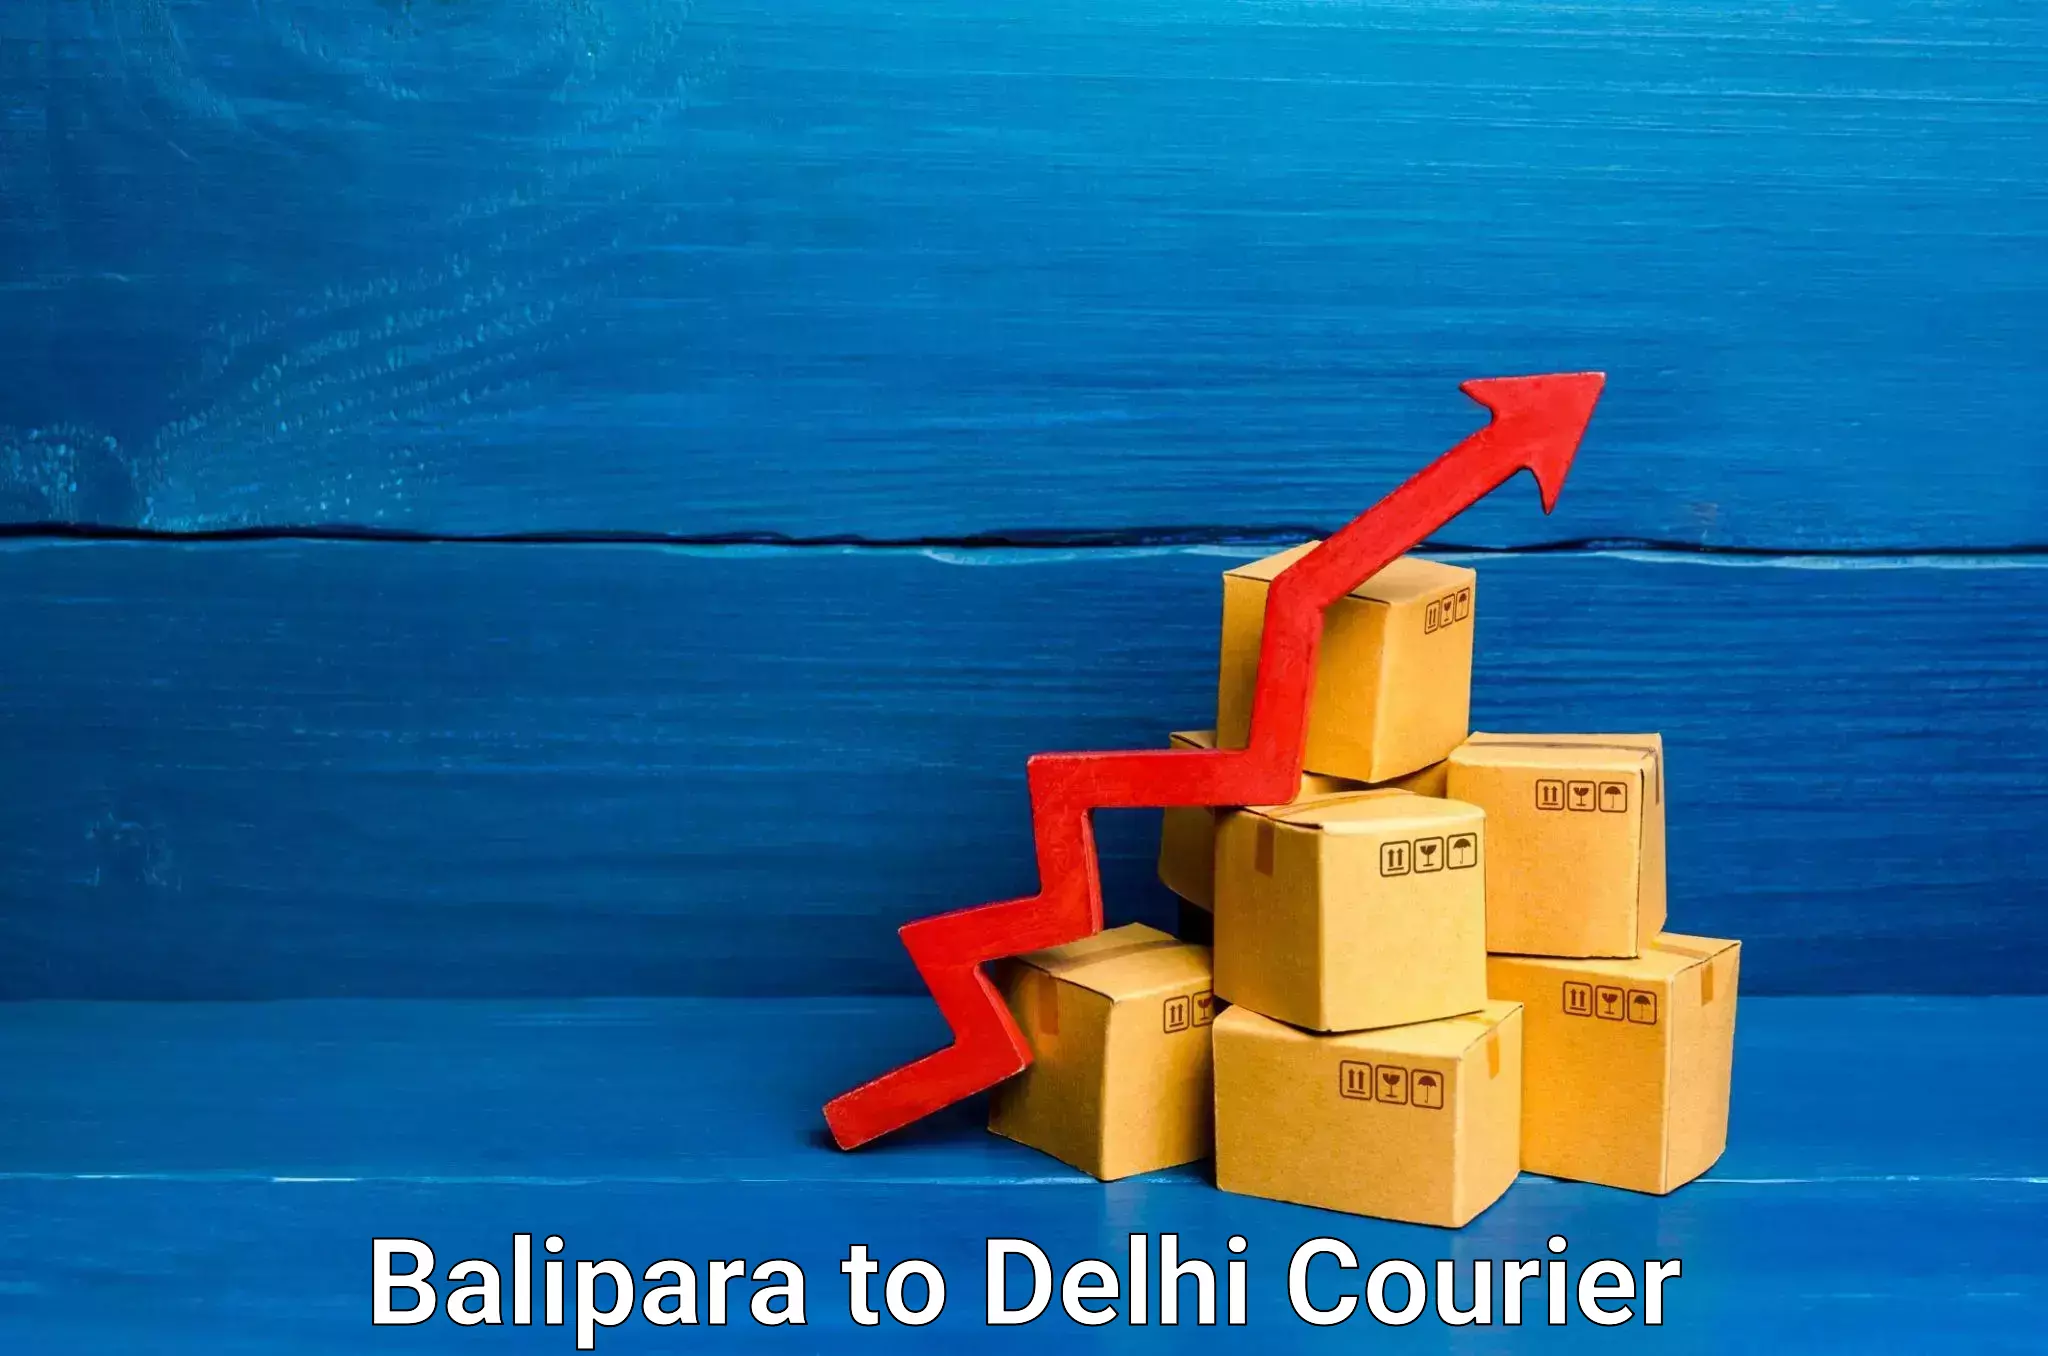 On-call courier service Balipara to Delhi